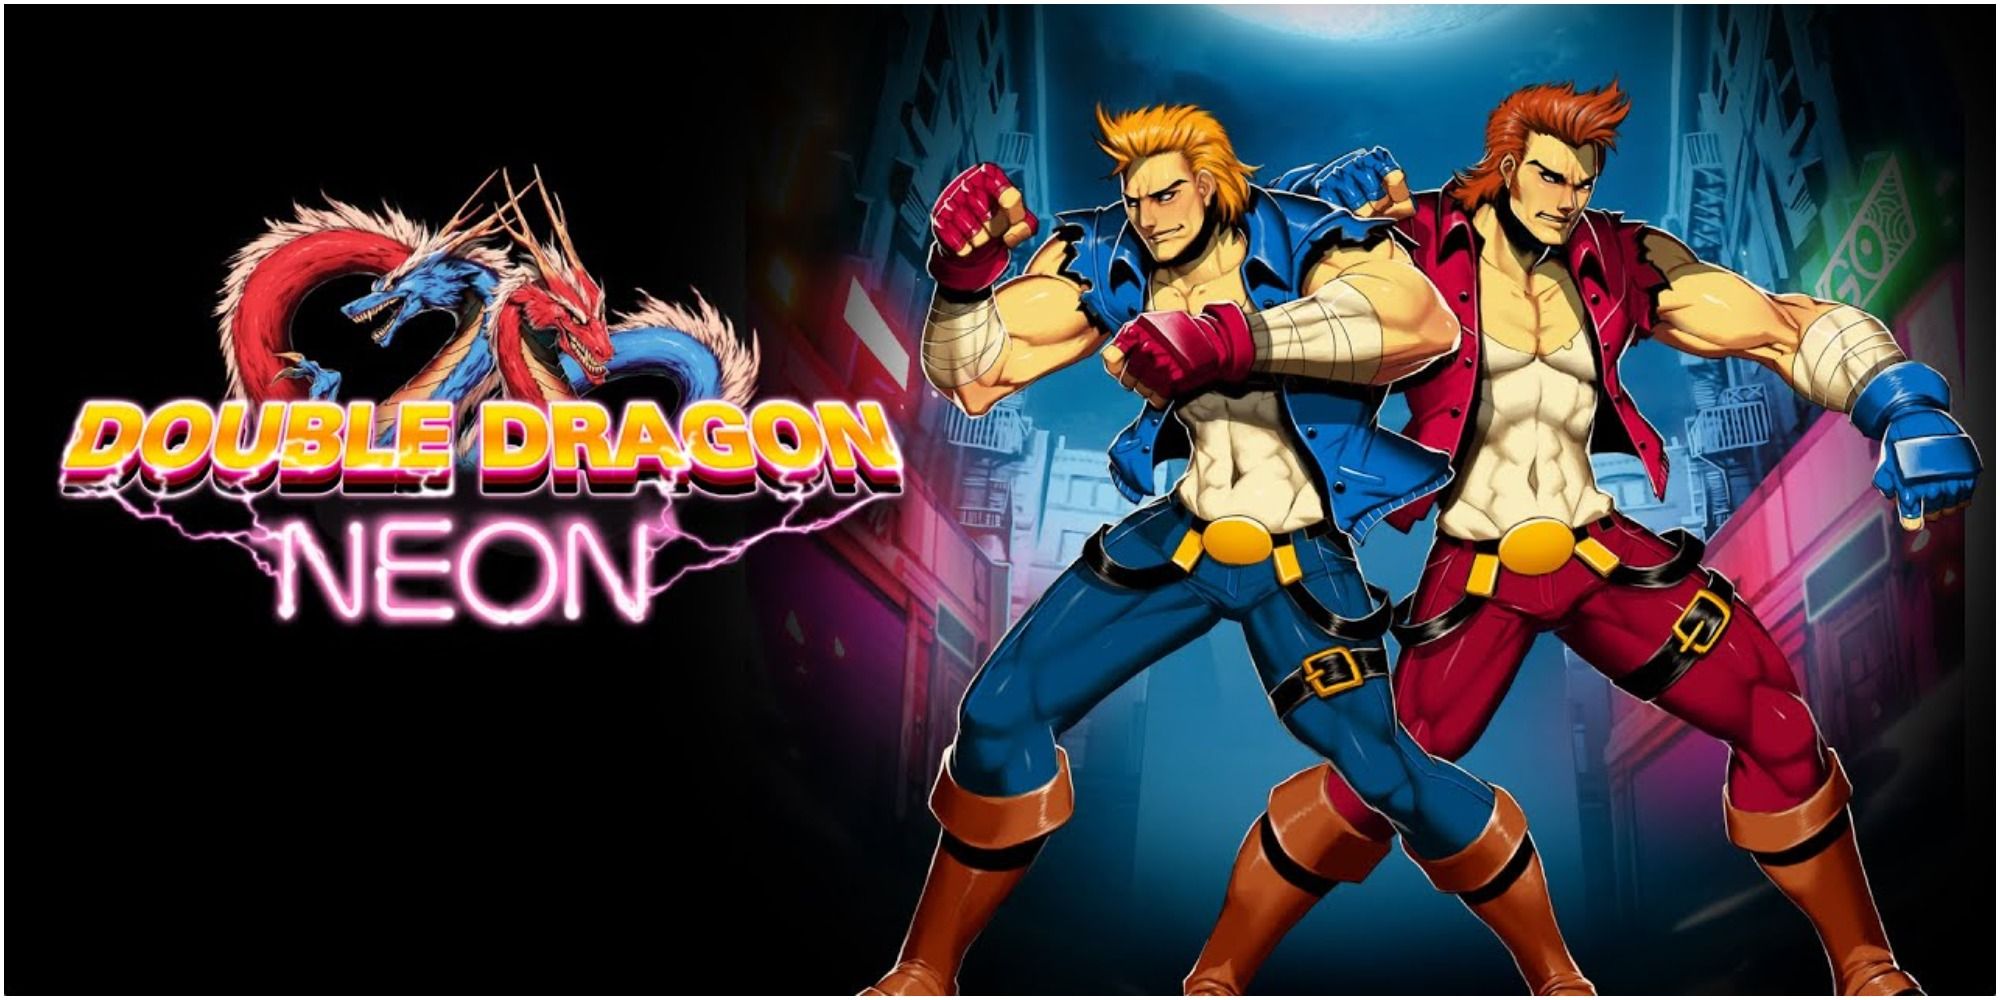 double dragon character art and logo